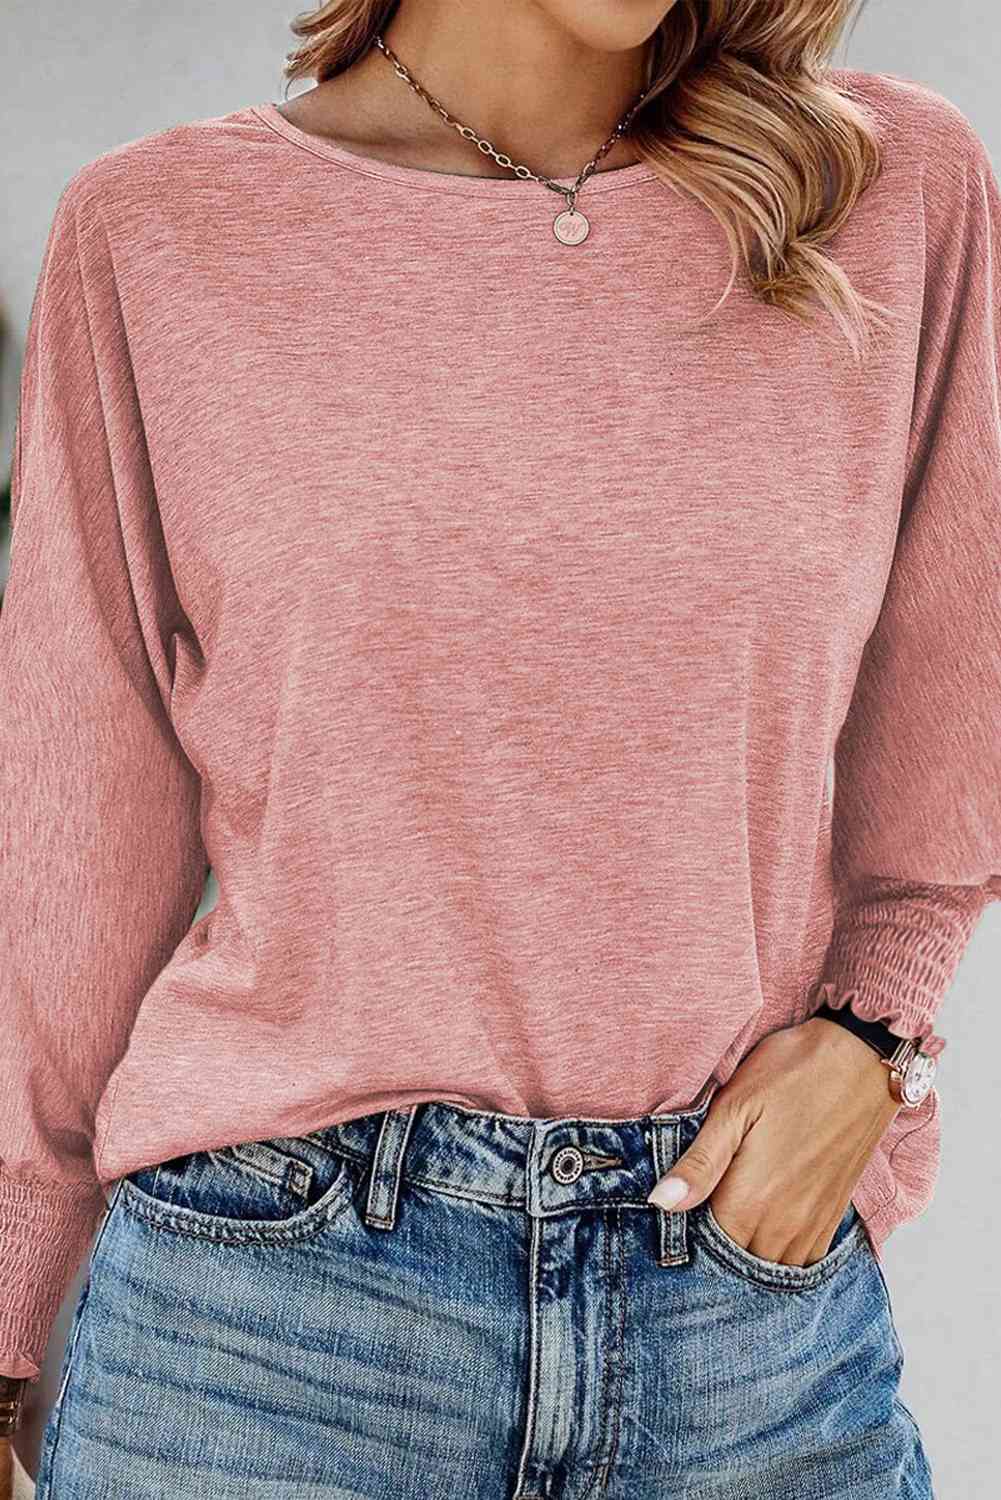 Round Neck Smocked Long Sleeve Blouse - Pink / S - Women’s Clothing & Accessories - Shirts & Tops - 13 - 2024